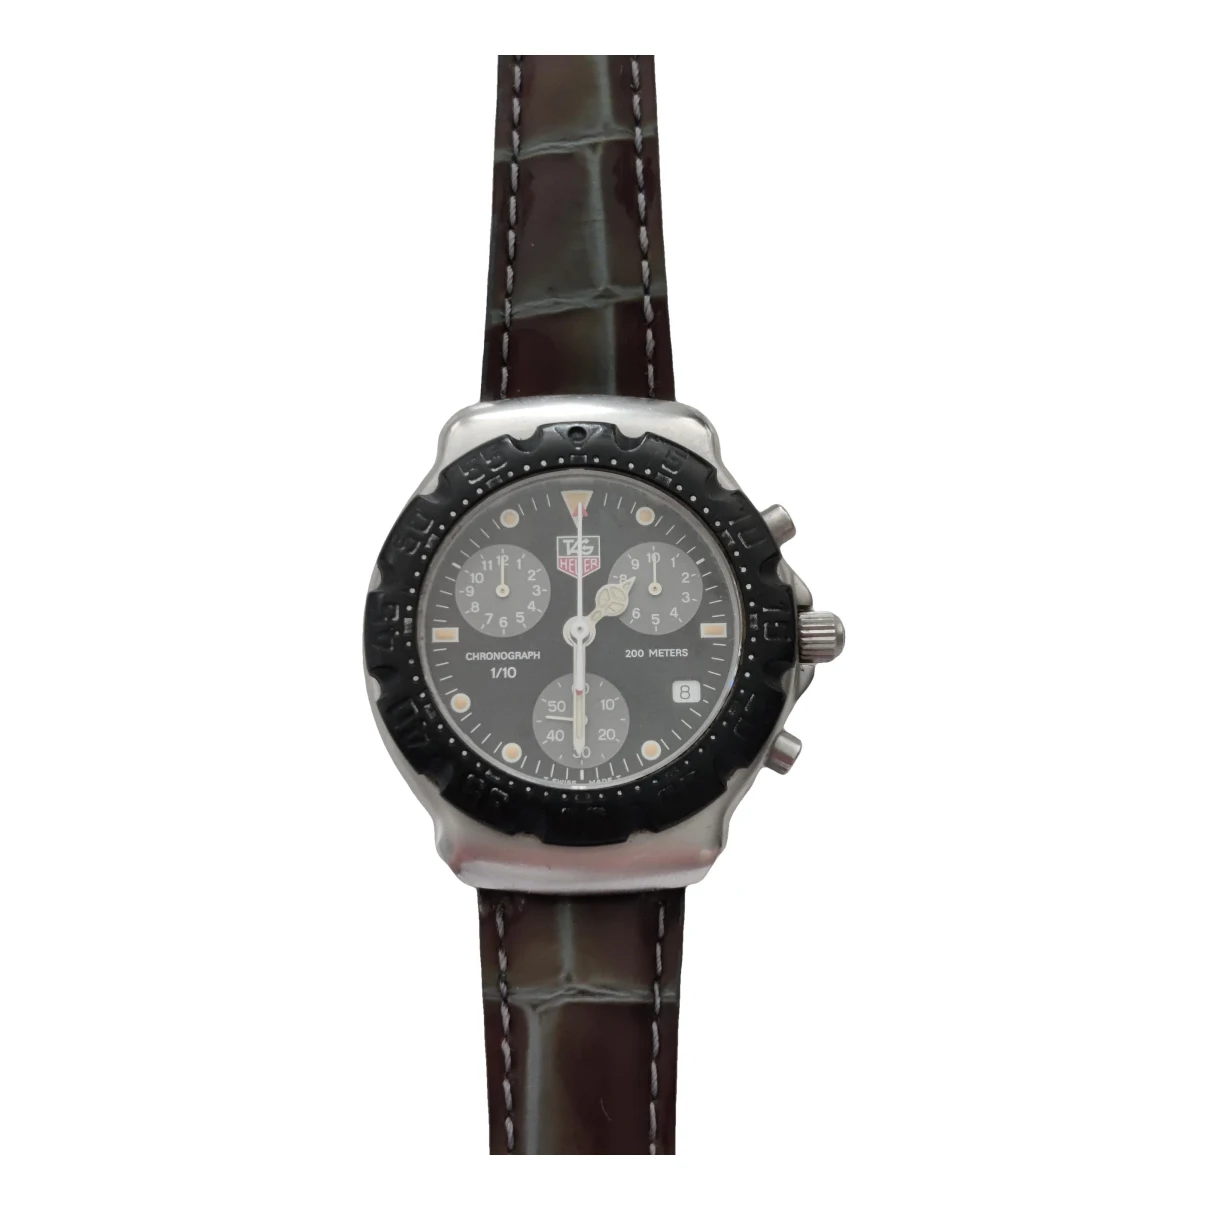 Pre-owned Tag Heuer Formula 1 Watch In Black